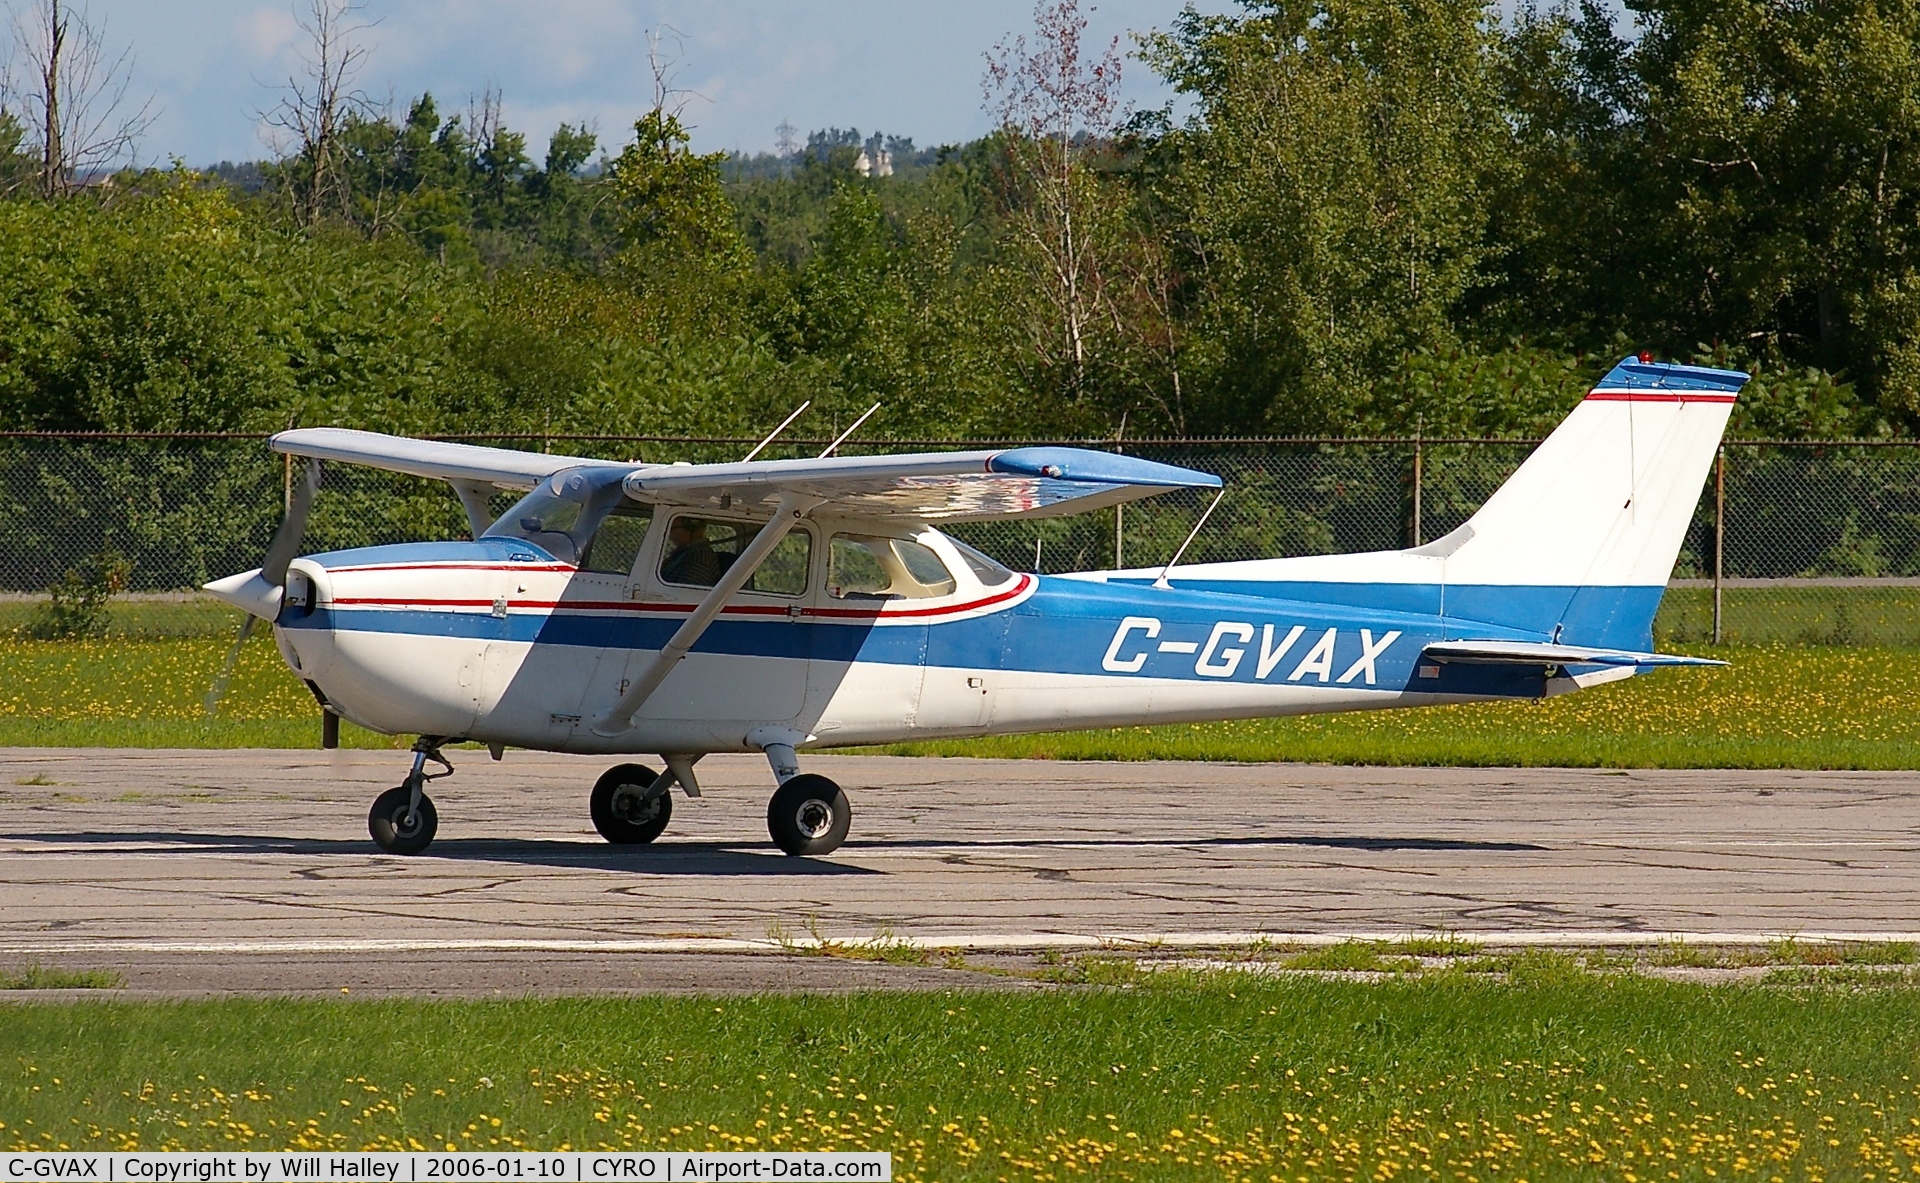 C-GVAX, 1973 Cessna 172M C/N 17261236, C-GVAX getting ready to take off from runway 27 at Rockcliffe